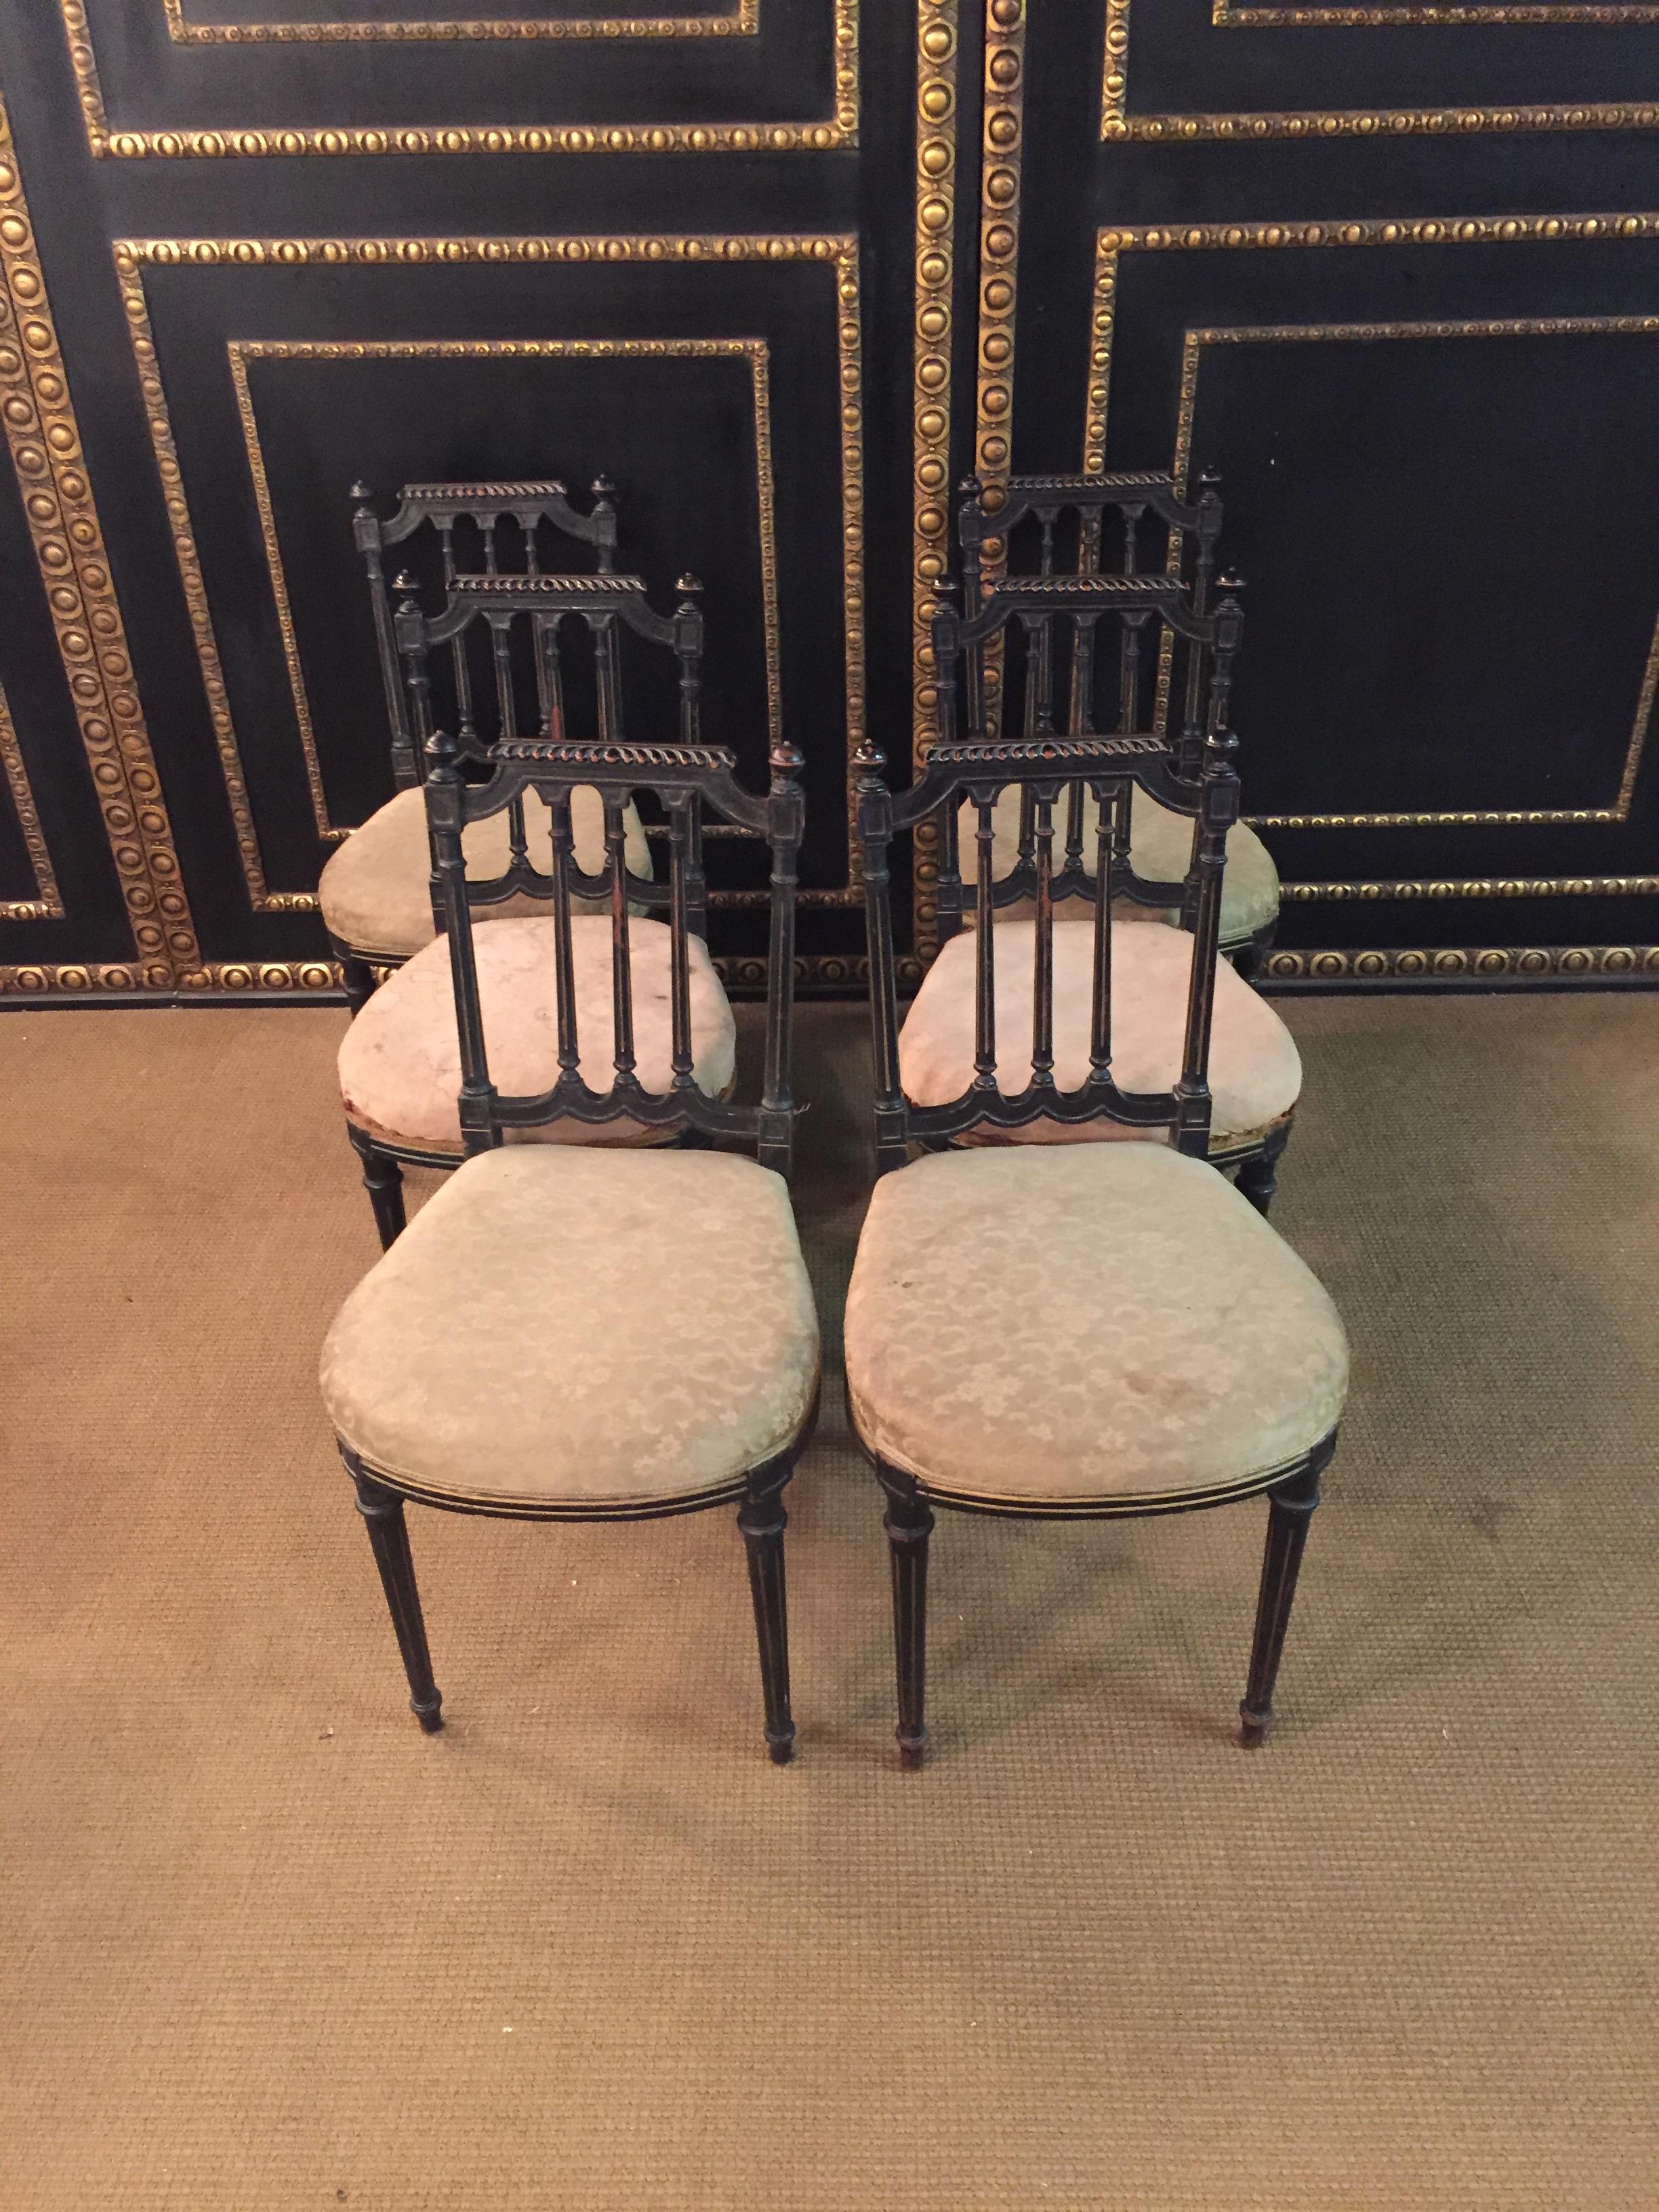 Rare version of 6 chairs in Louis XV style.
Backrest with 5 carved columns.
Black ebonized.